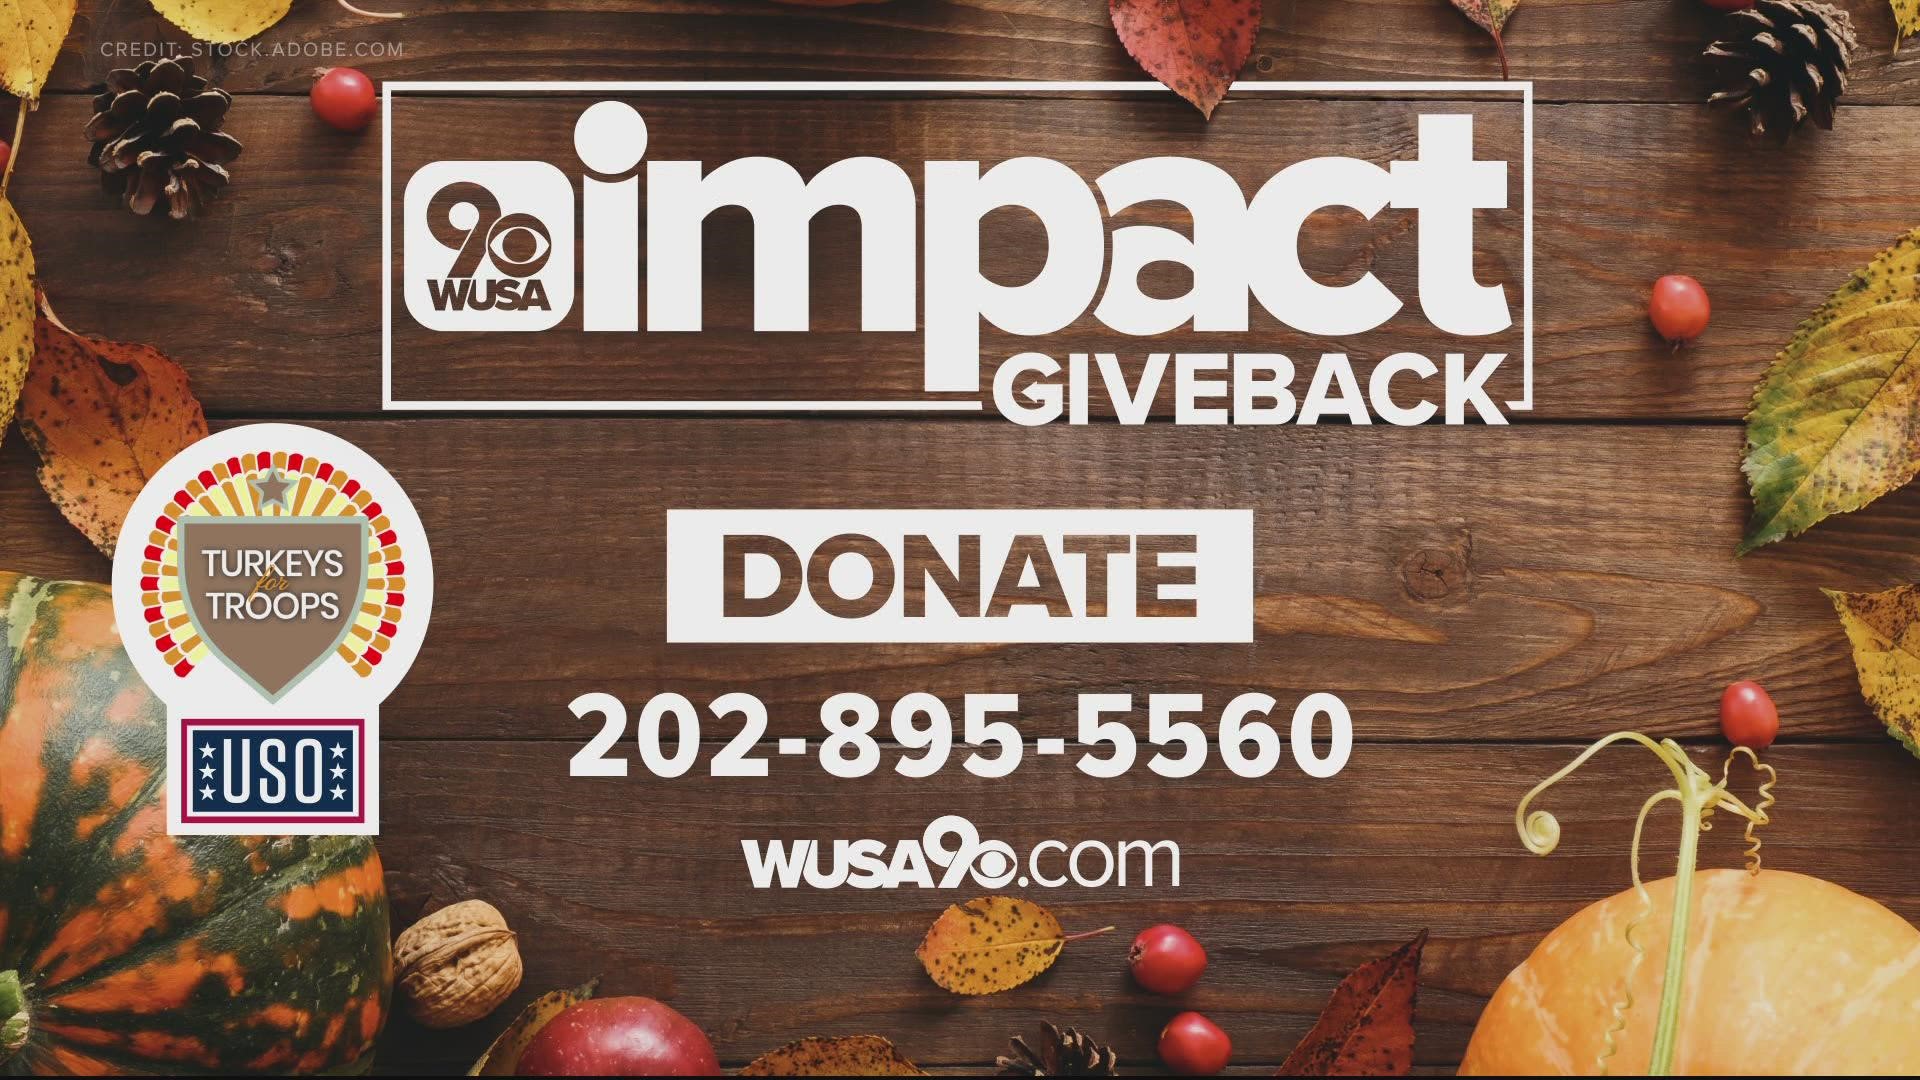 WUSA9 and the USO of Metropolitan Washington-Baltimore (USO-Metro) are once again teaming up to raise money to thank our military families this holiday season